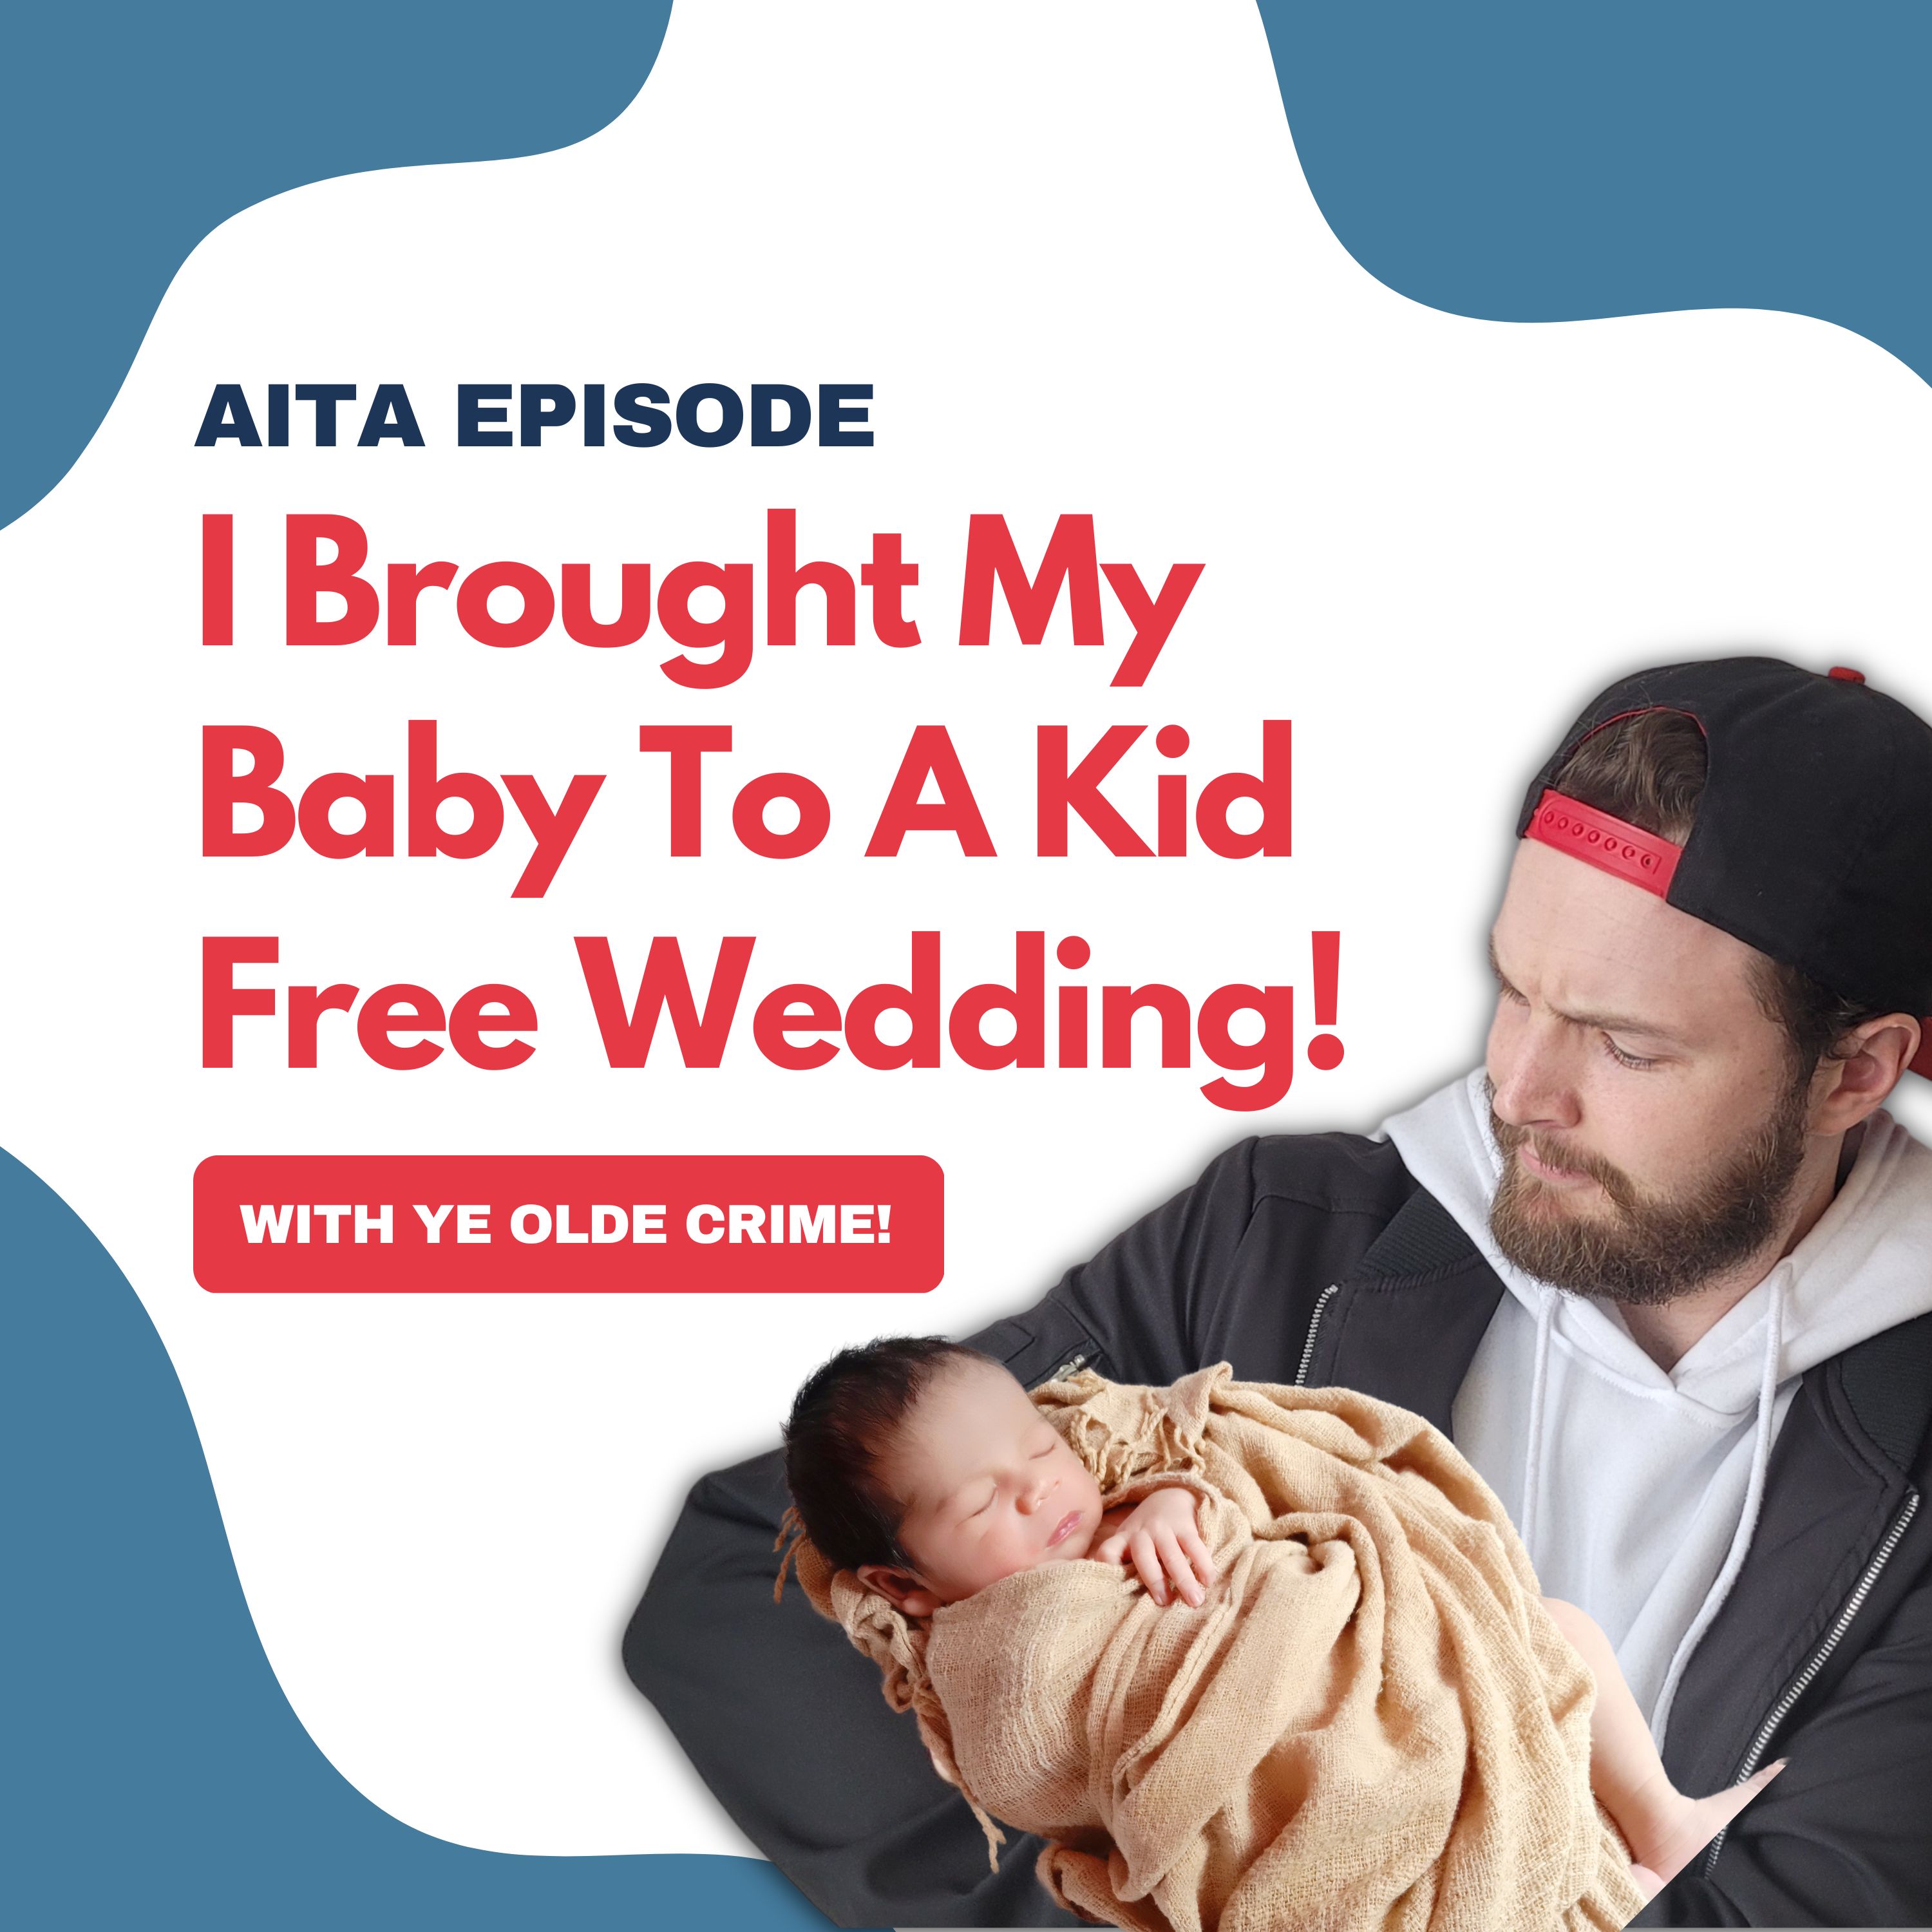 Am I The Asshole | I Brought My Baby To A Kid-Free Wedding!